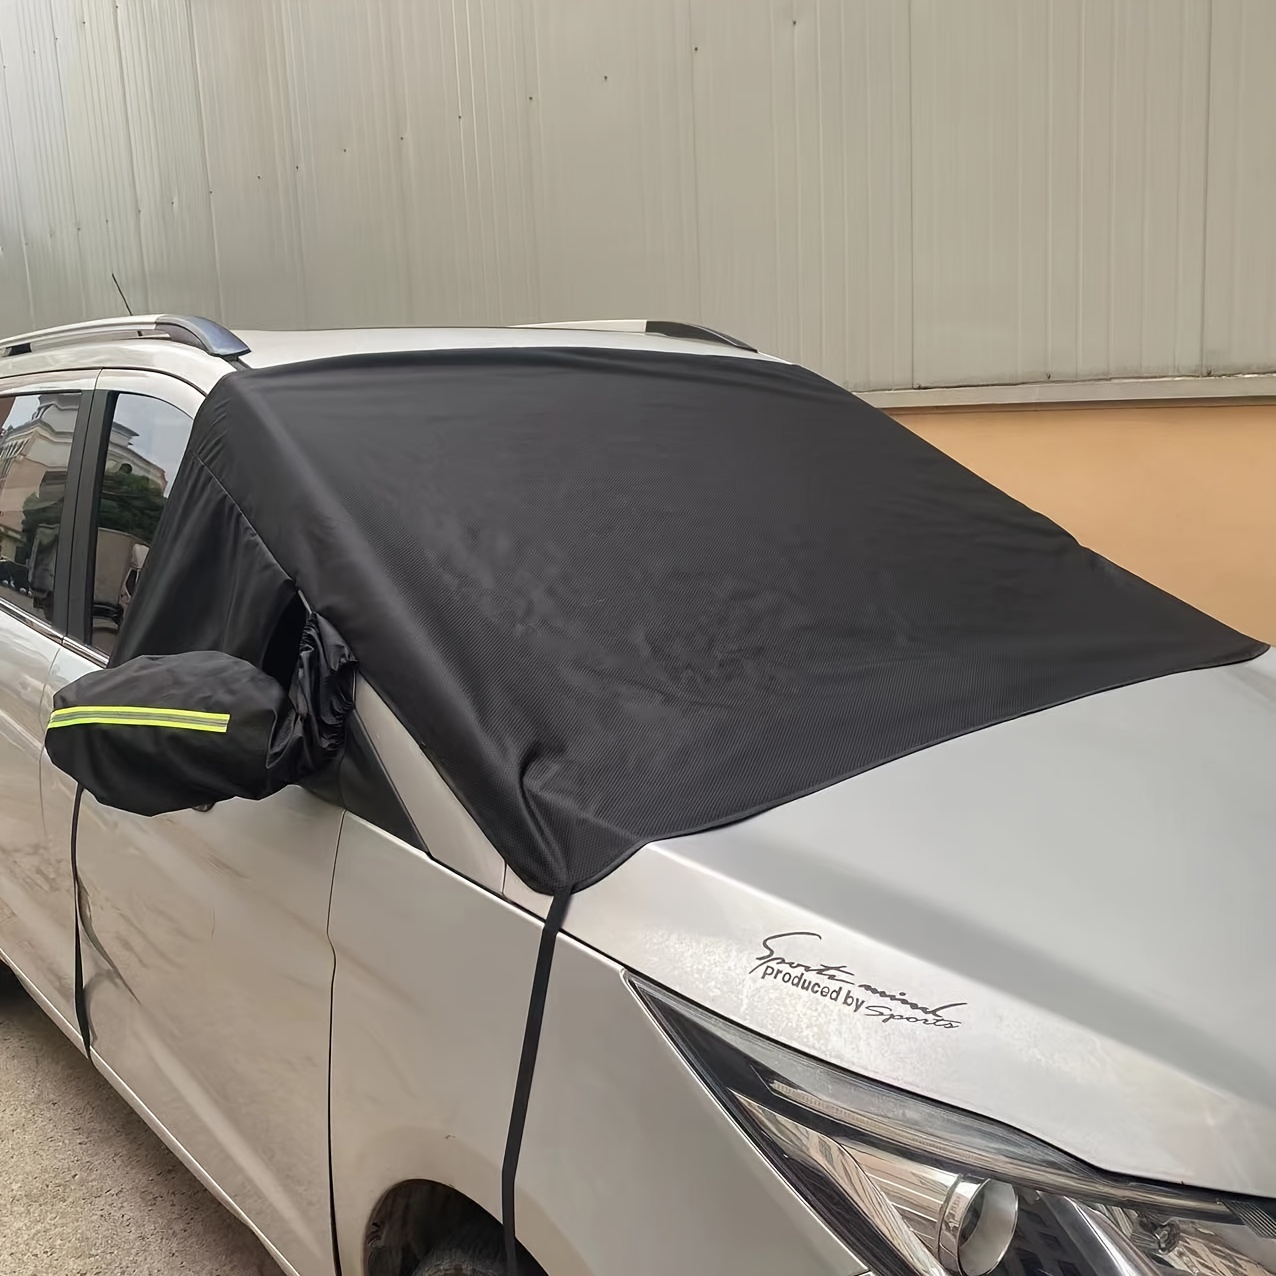  Waterproof Car Cover for Ford Ka Thickened Oxford